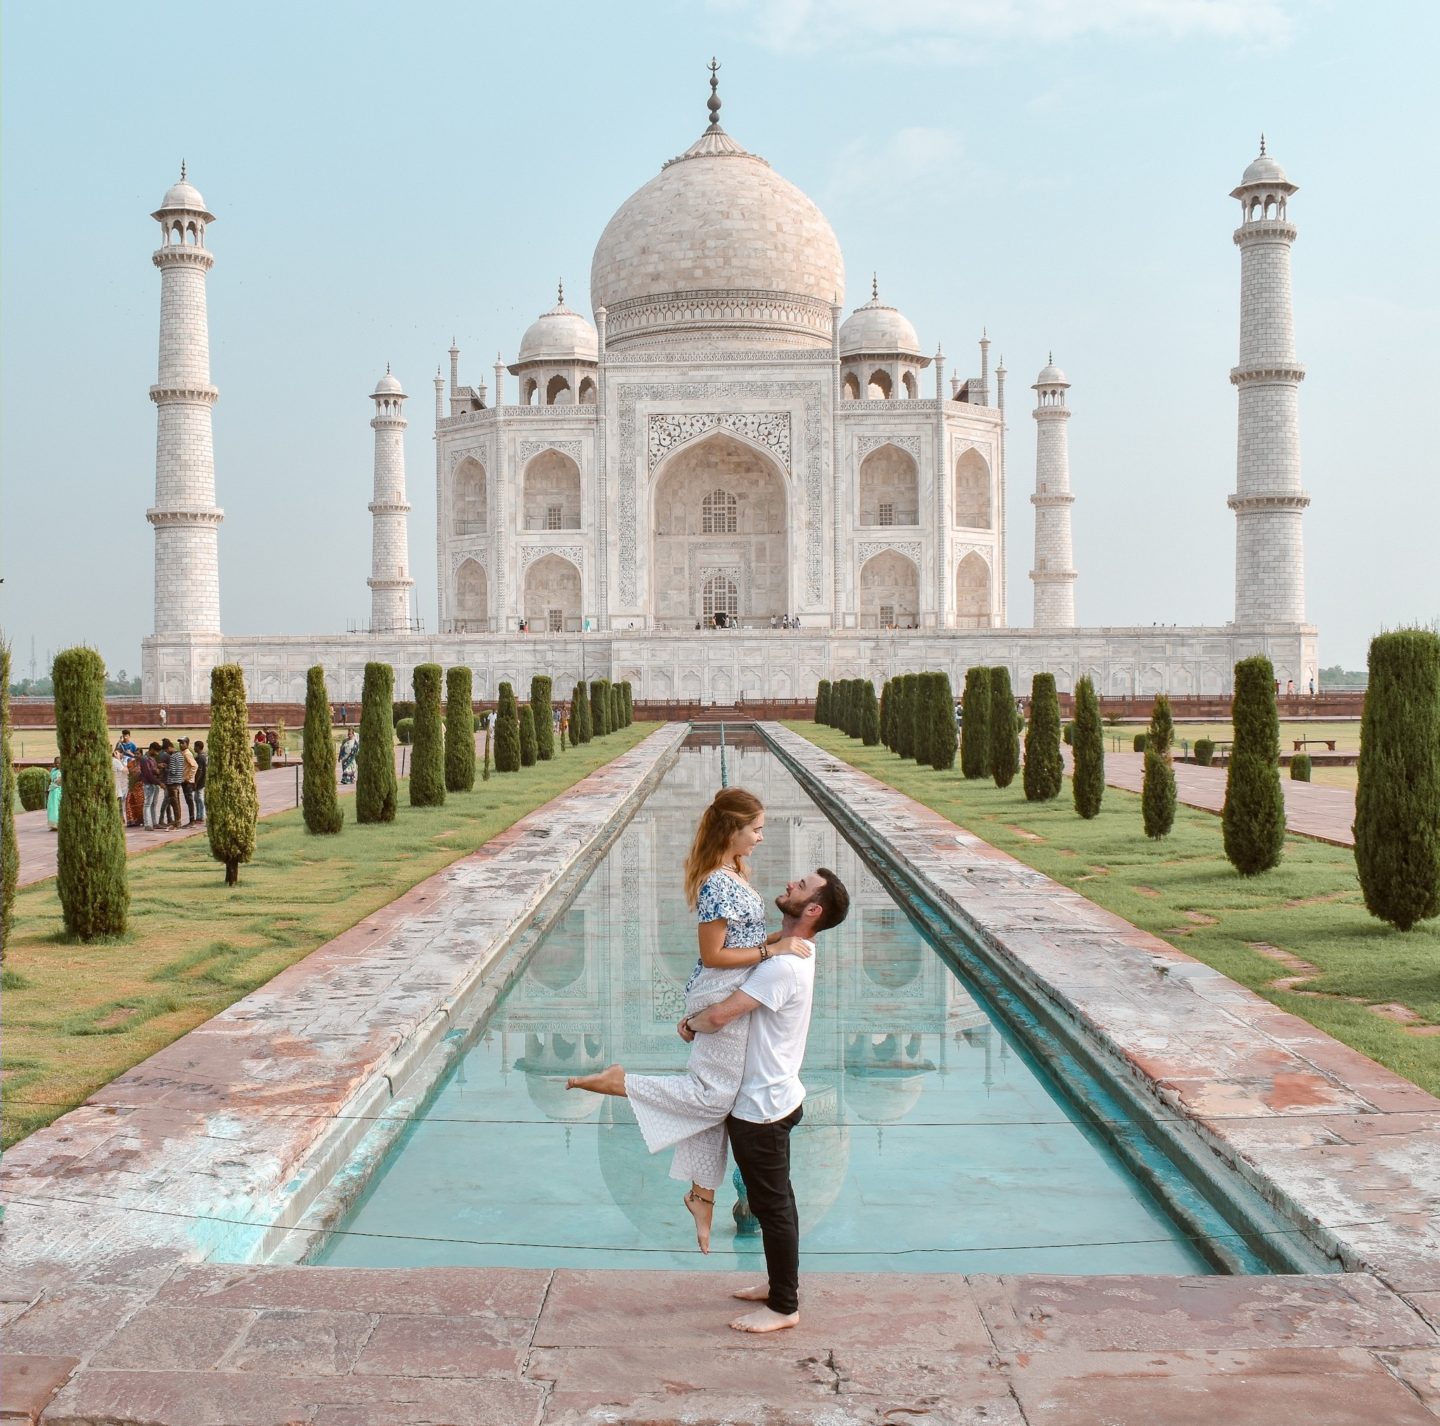 Travelling India - Top spots to see in India The Taj Mahal